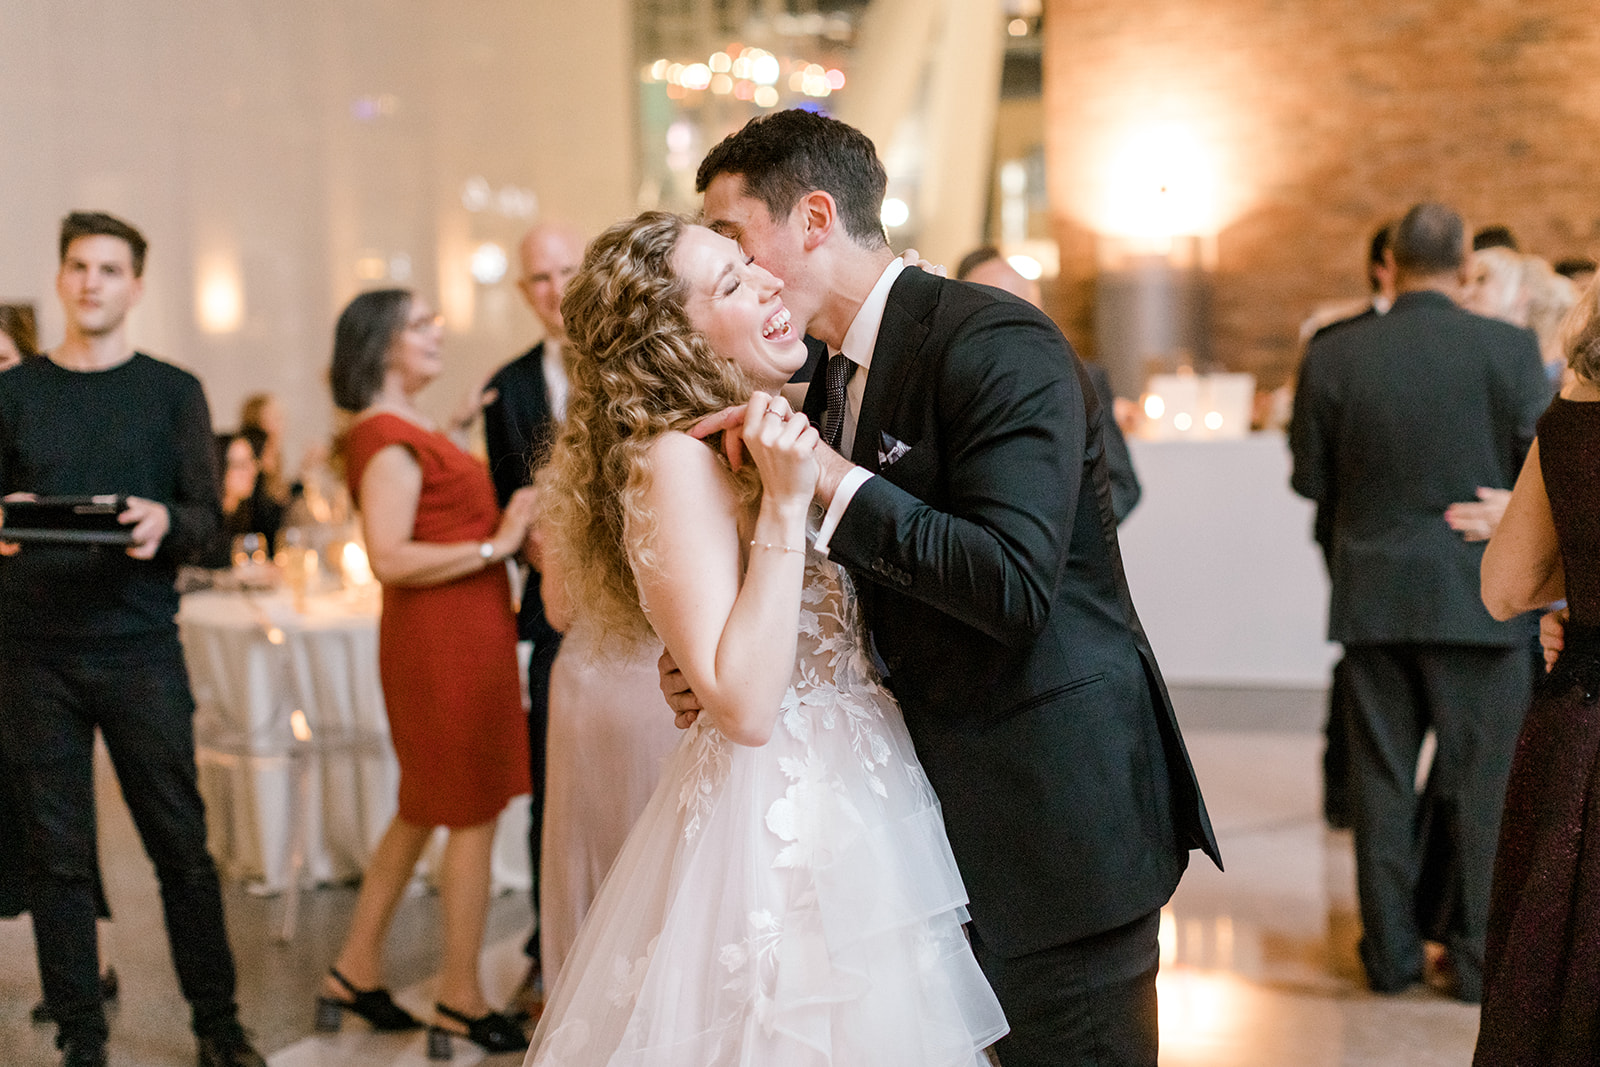 Couple's First Dance during wedding reception at Ricarda's Toronto